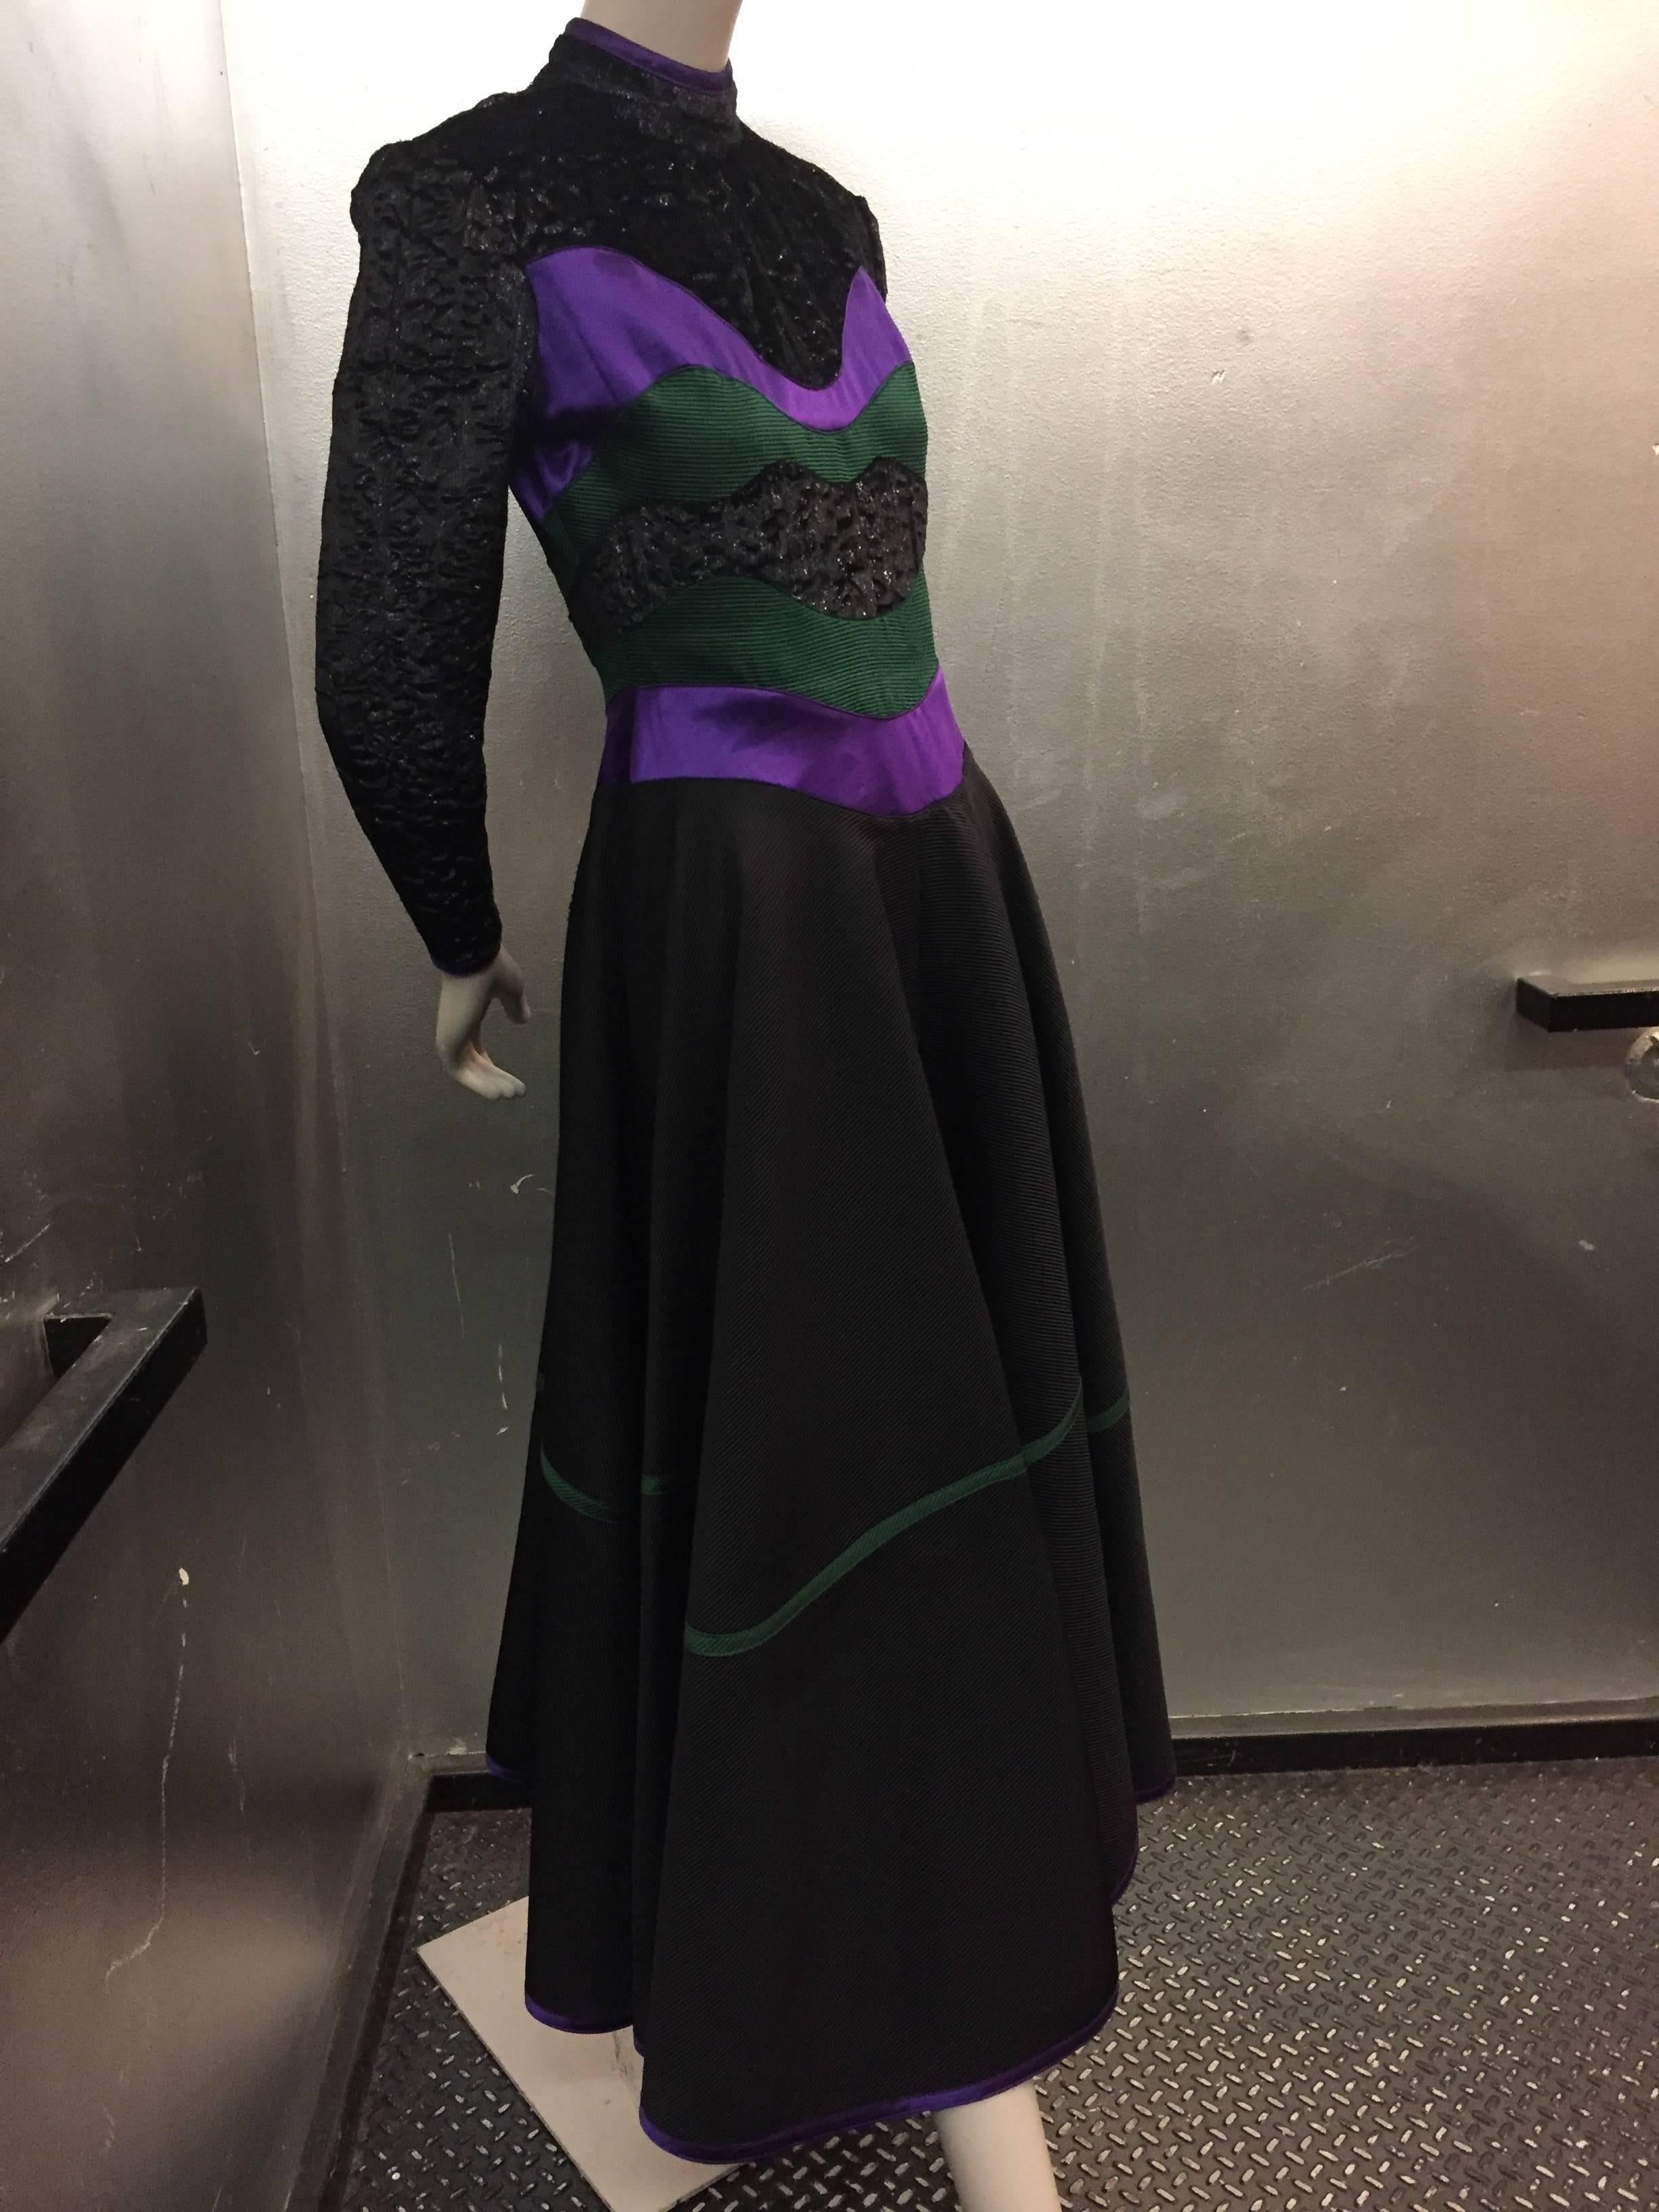 Geoffrey Beene cocktail dress with dramatic color blocking in purple and green silk satin at waist and bodice.

Velvet black metallic thread top portion of the dress and heavy silk faille bias skirt with full swing trimmed with matching accent